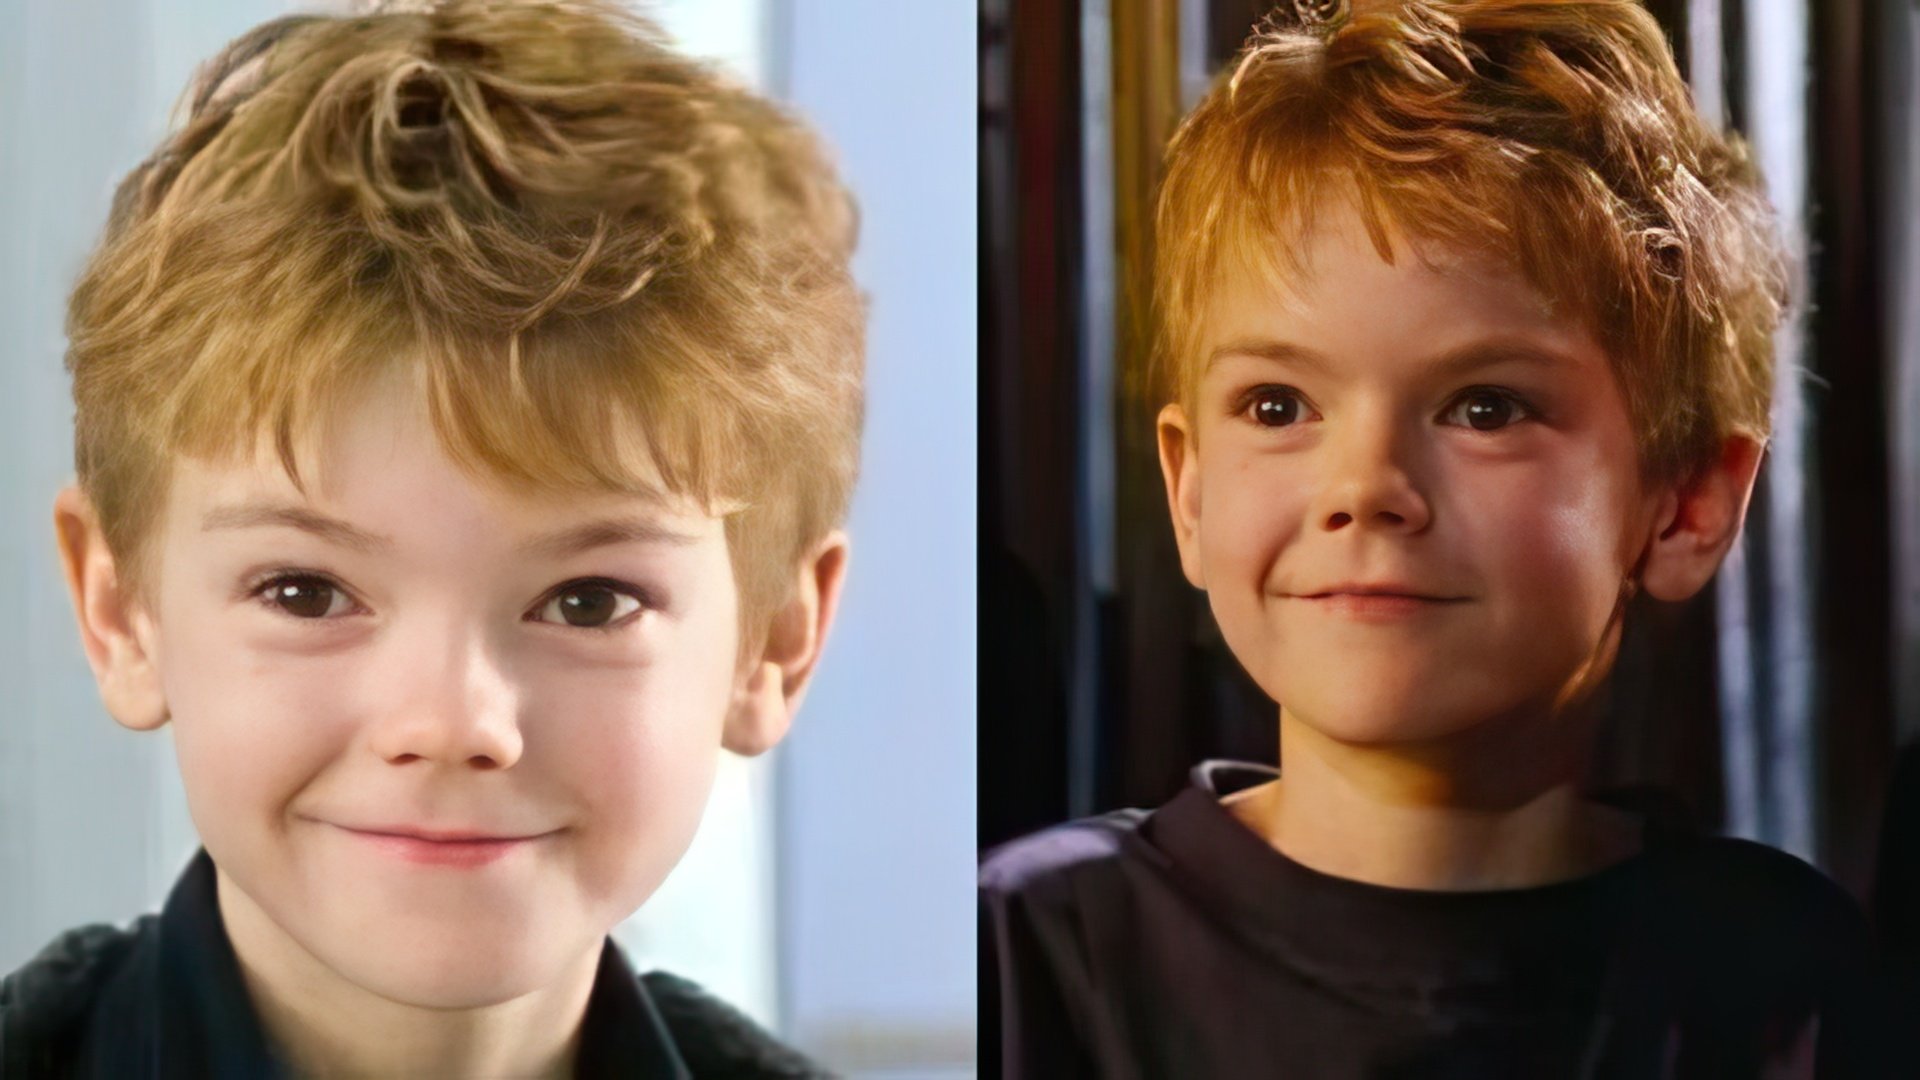 Thomas Sangster’s childhood picture